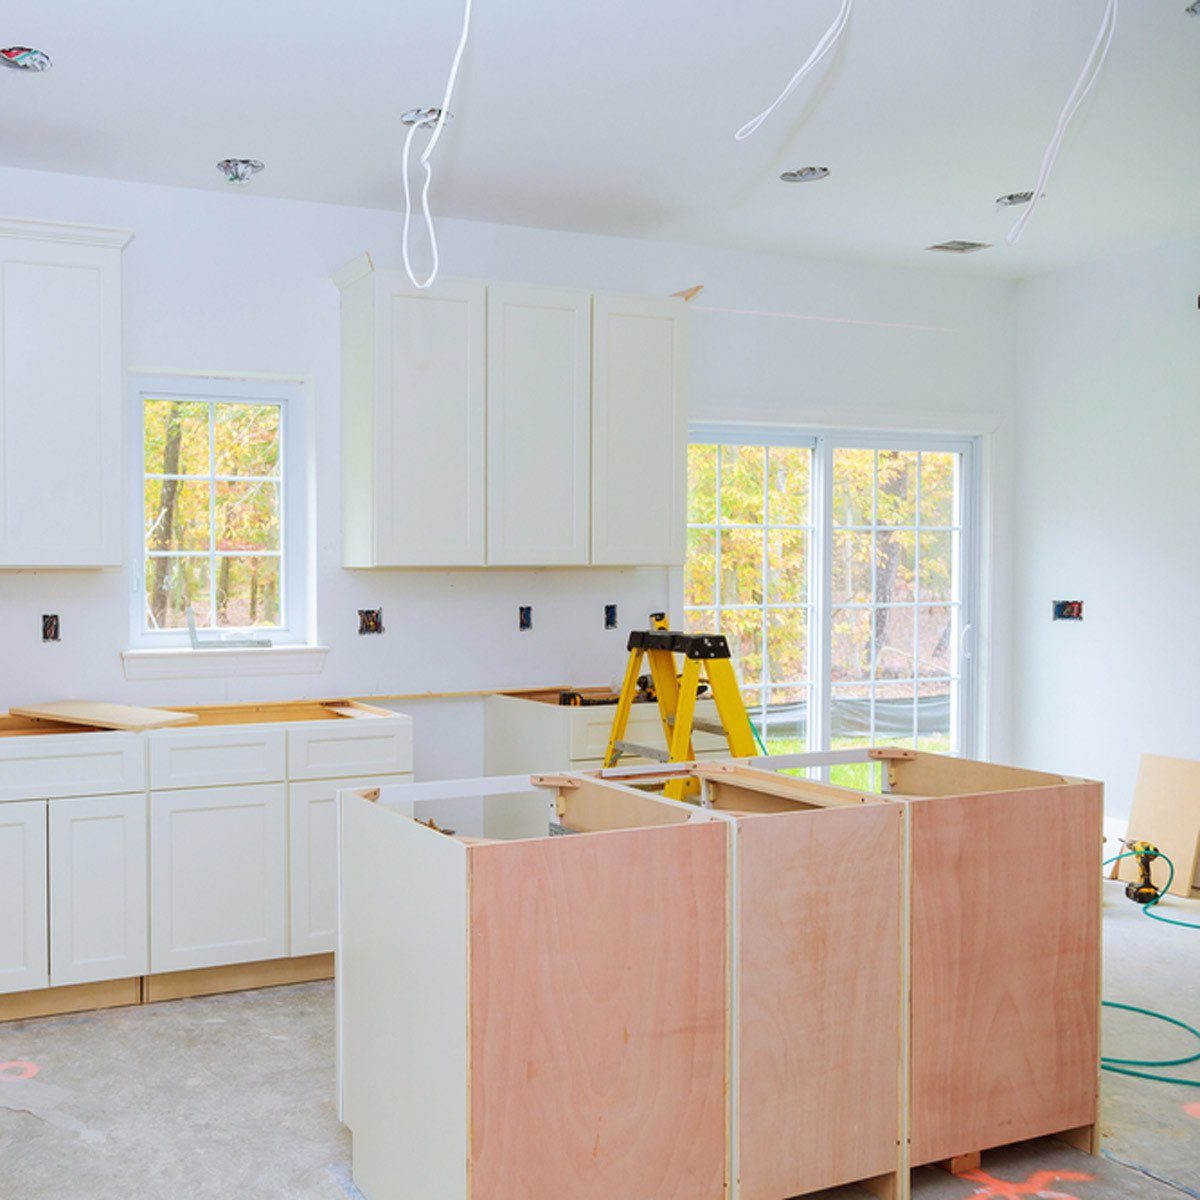 Build Your Own Island Kitchen remodel